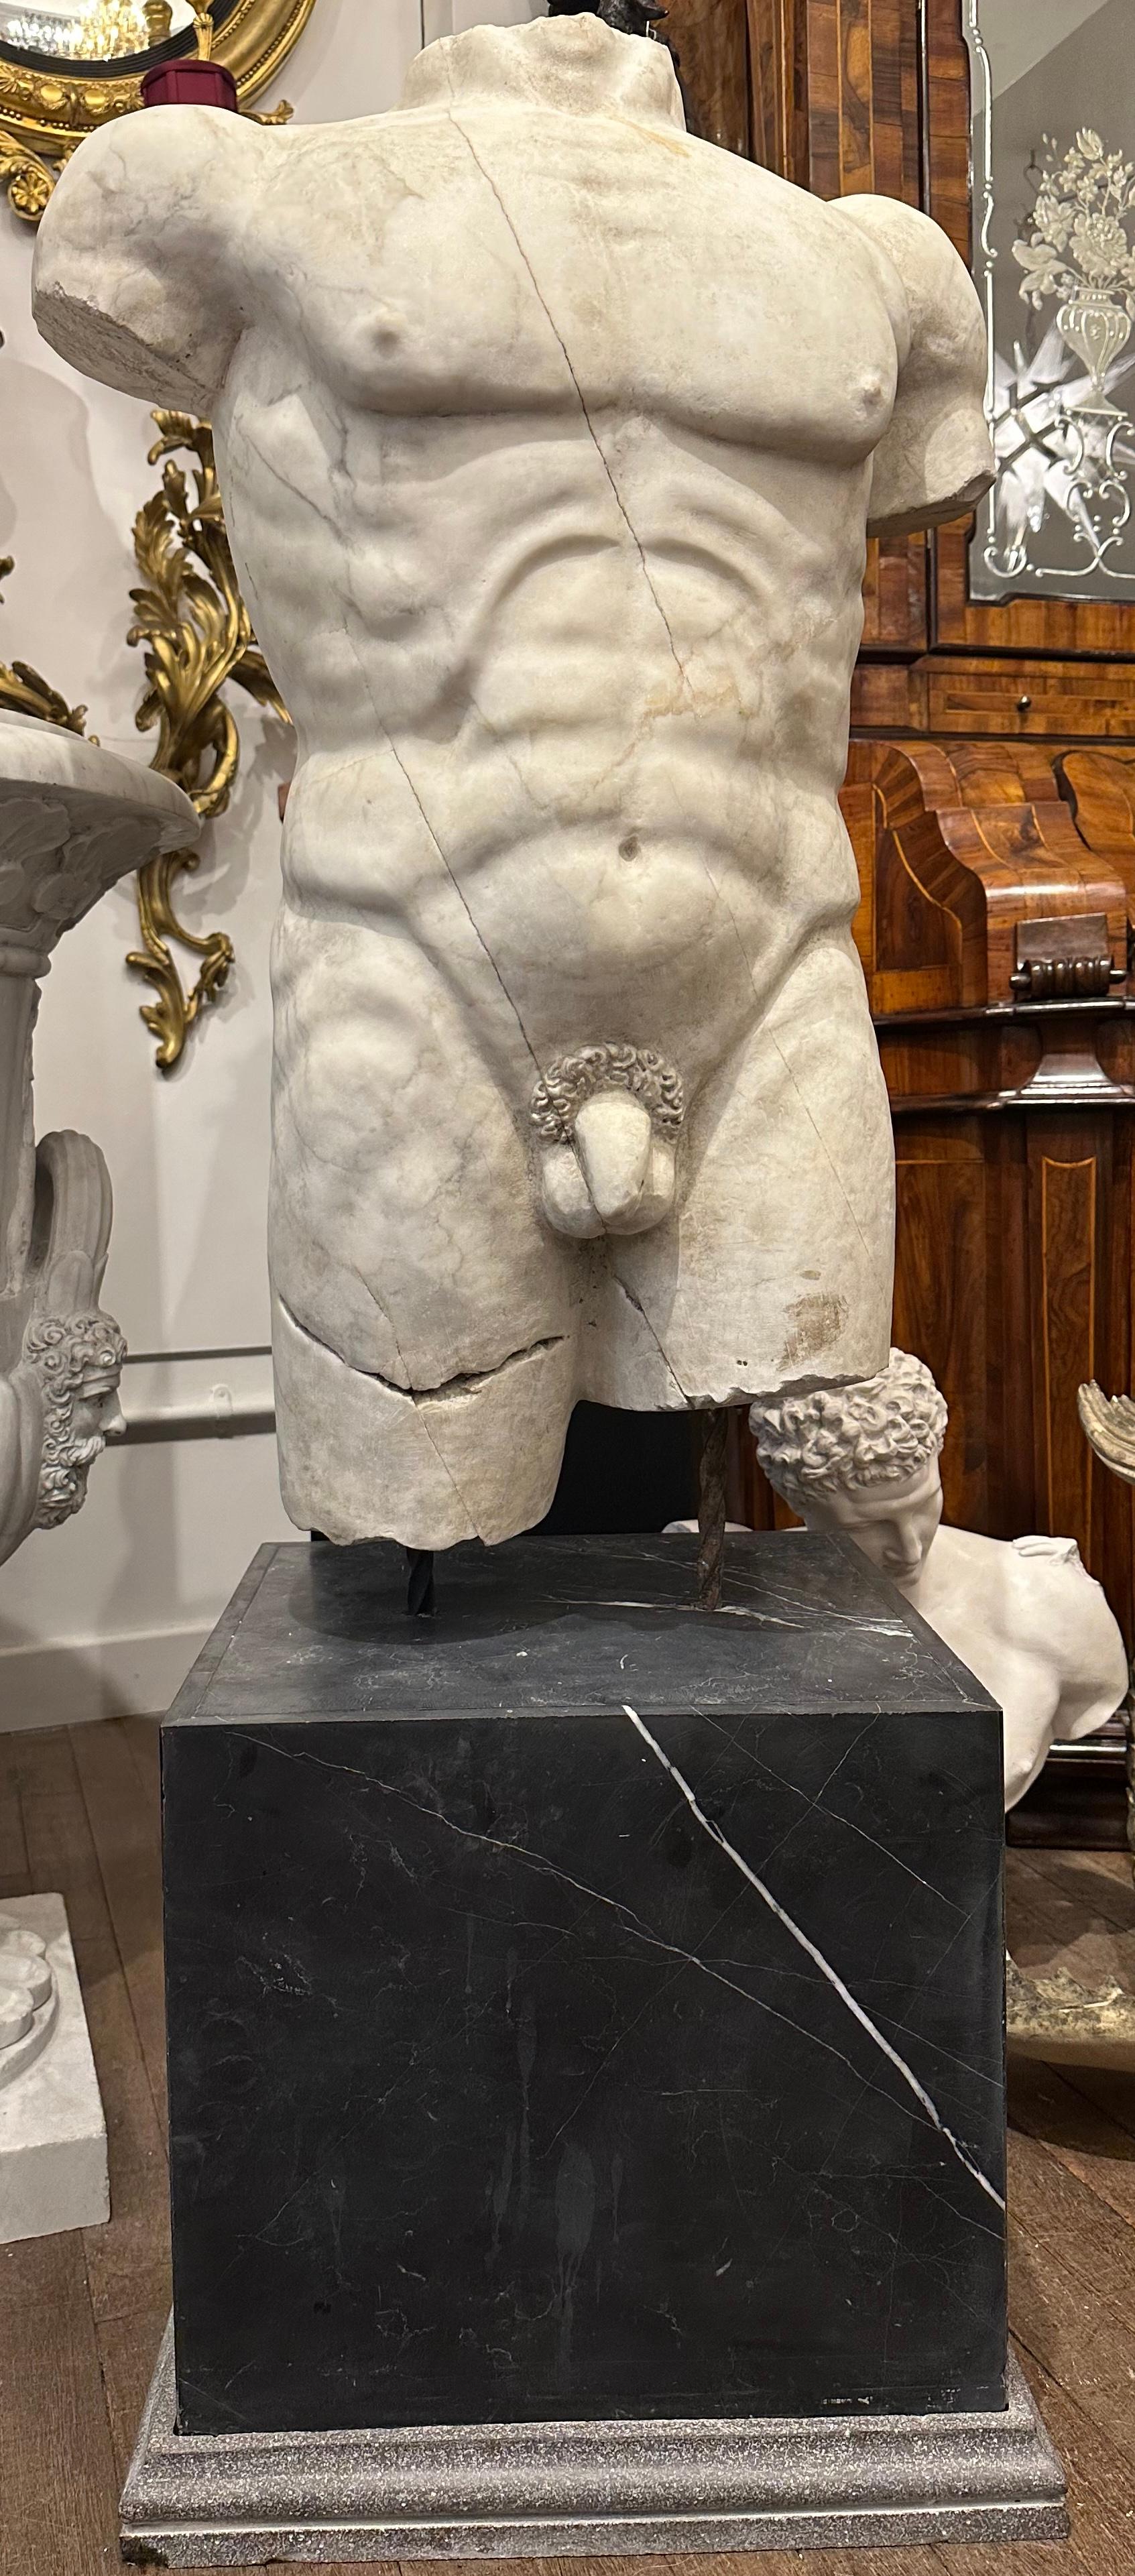 A handsomely carved male marble torso on a black marble base. The carving is detailed and realistic, clearly depicting the contours and muscles. The marble has a aged look, matt with veining and some cracks in keeping with its age and the original